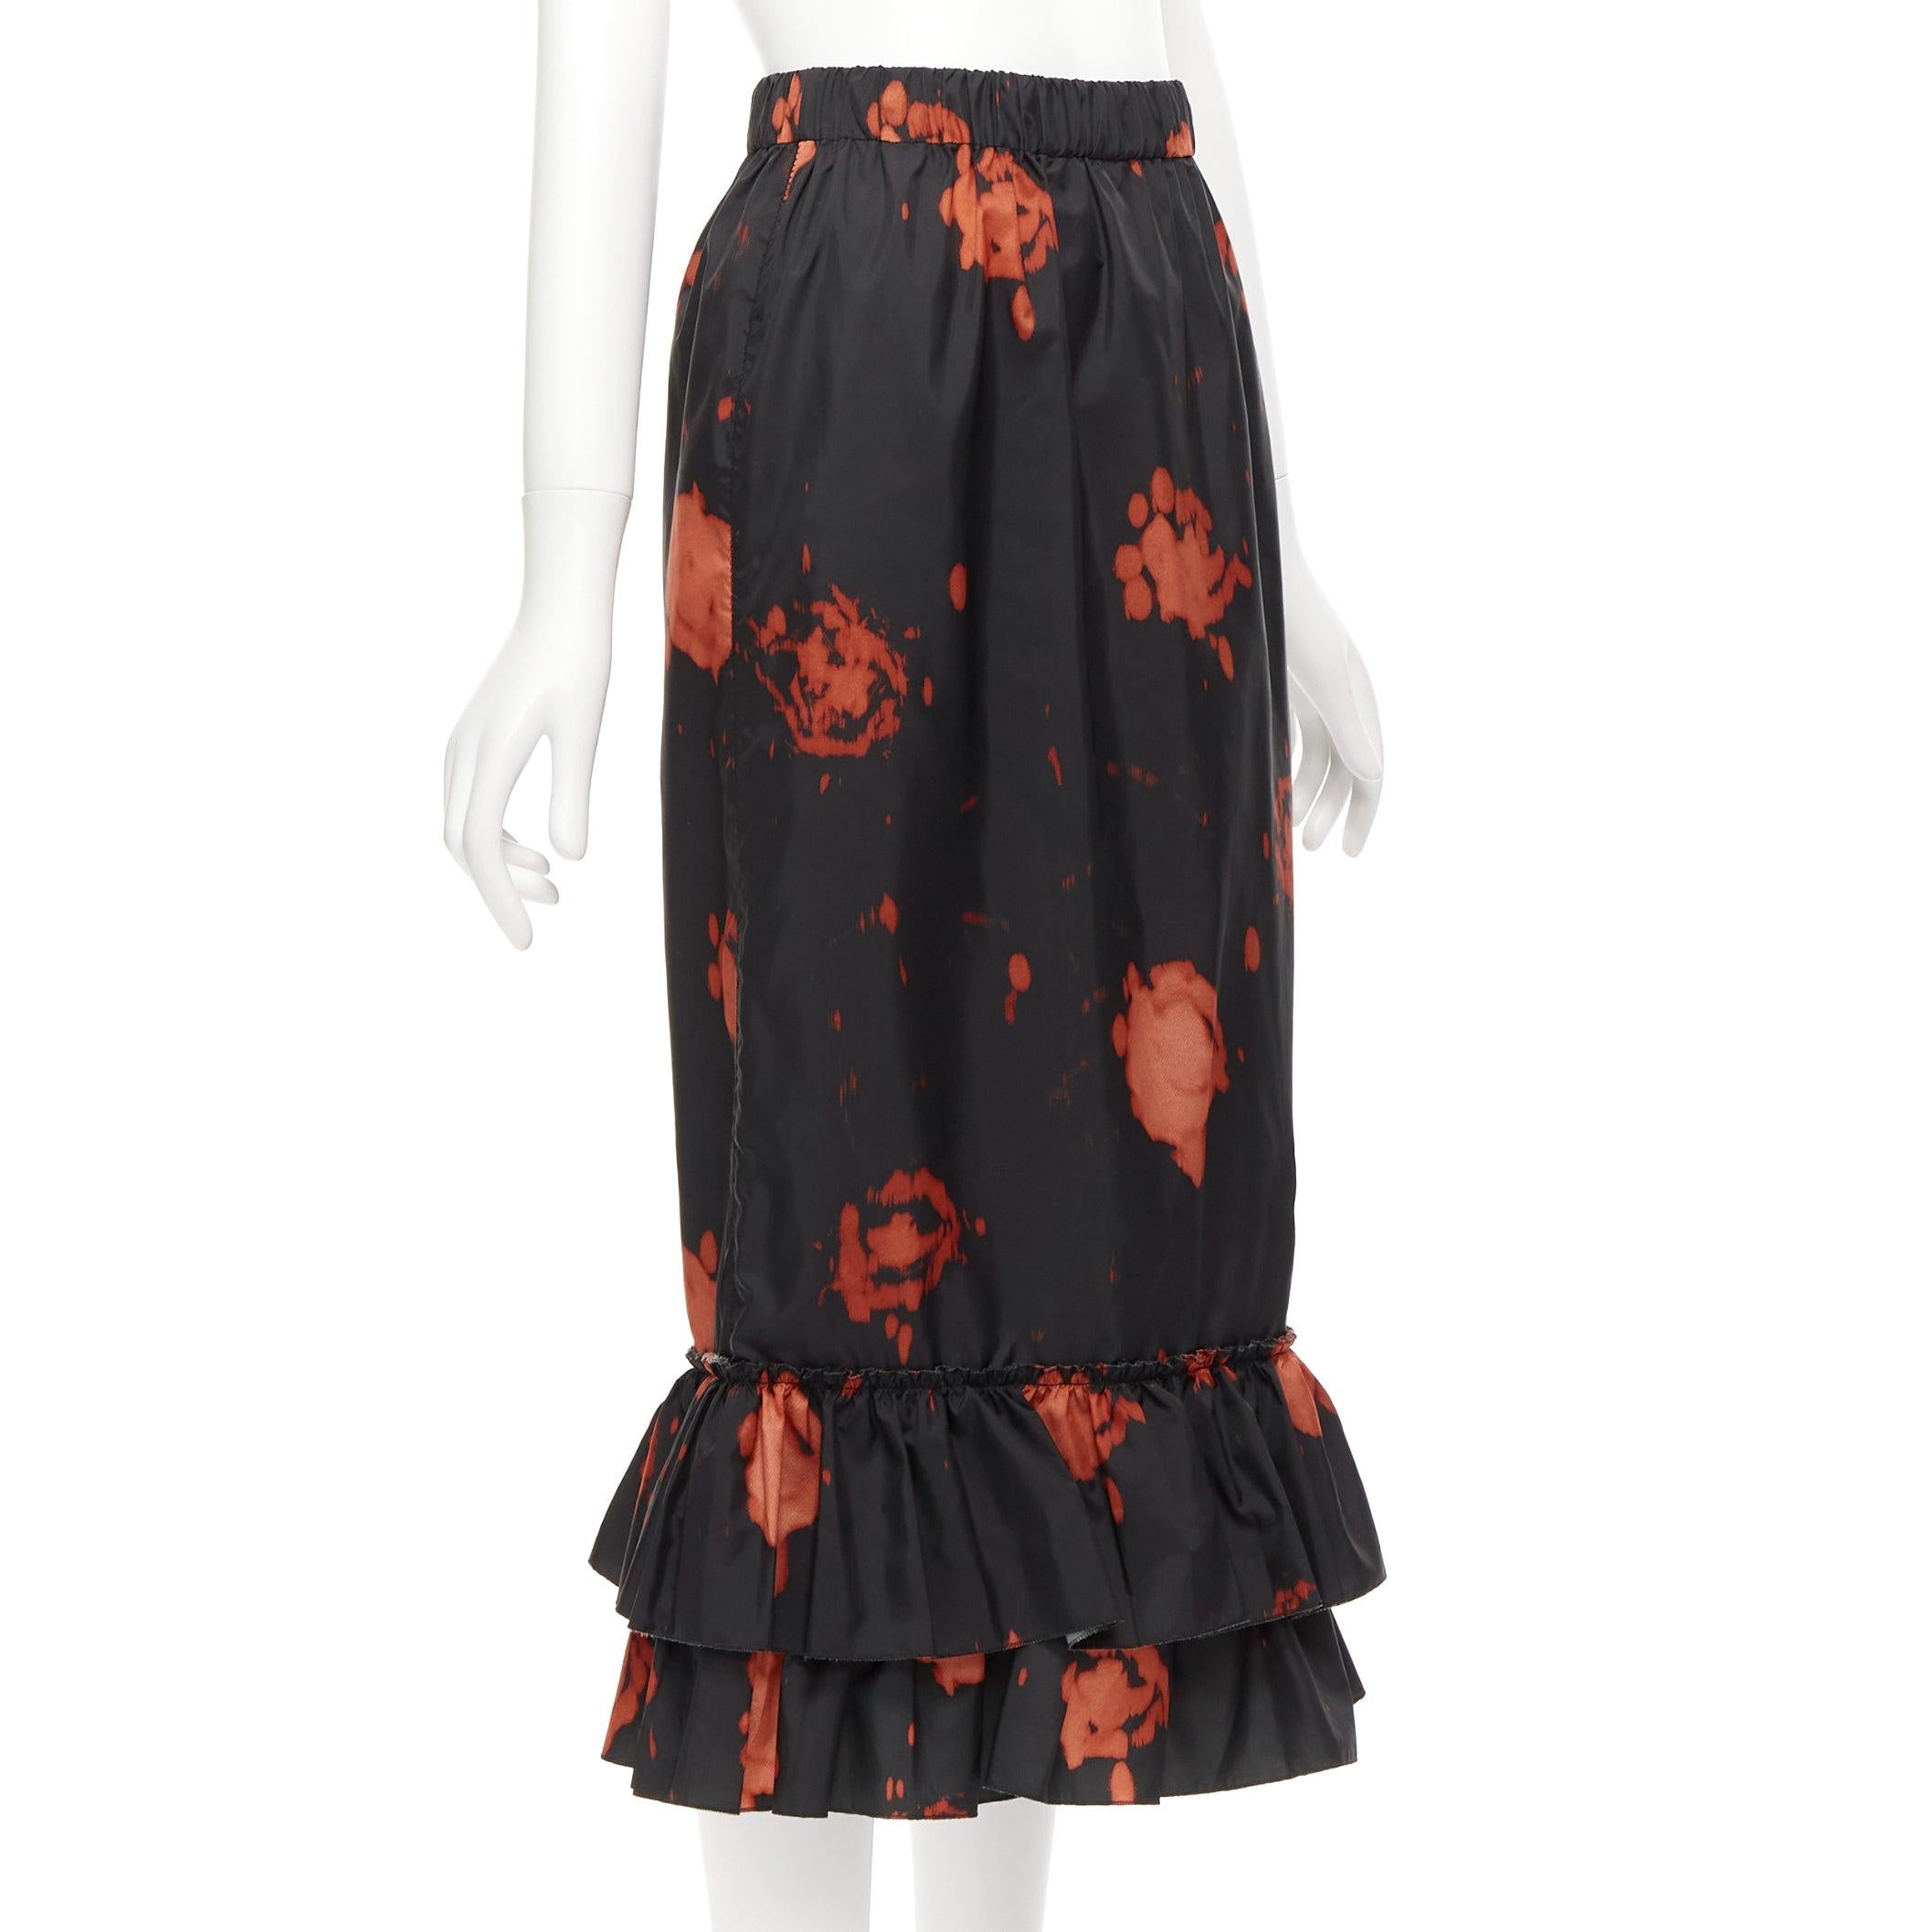 MARNI black red splatter tie dye print tiered ruffle hem midi skirt IT38 XS
Reference: CELG/A00264
Brand: Marni
Material: Polyester
Color: Black, Red
Pattern: Abstract
Closure: Elasticated
Extra Details: Back slit.
Made in: